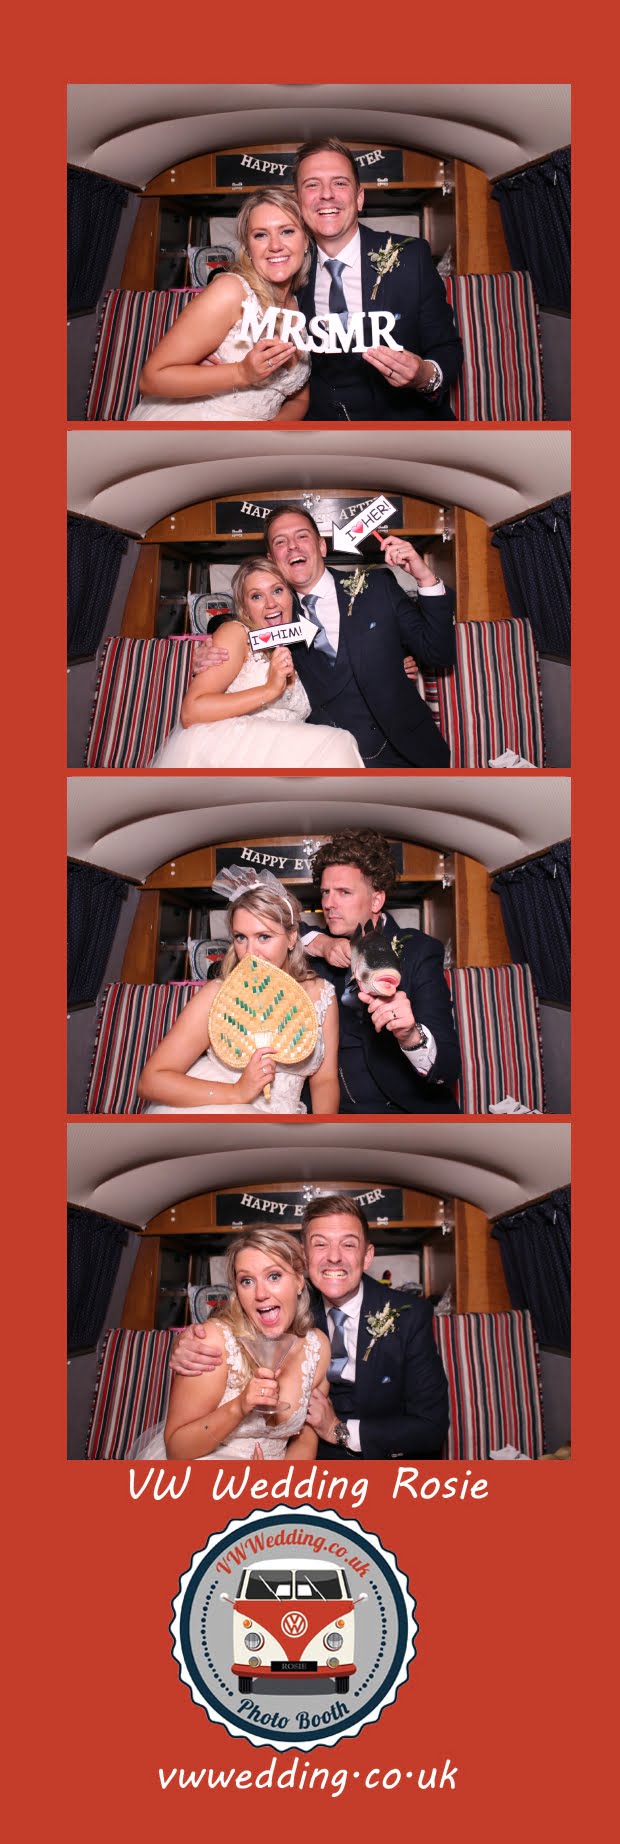 bride and groom wedding photo booth strip